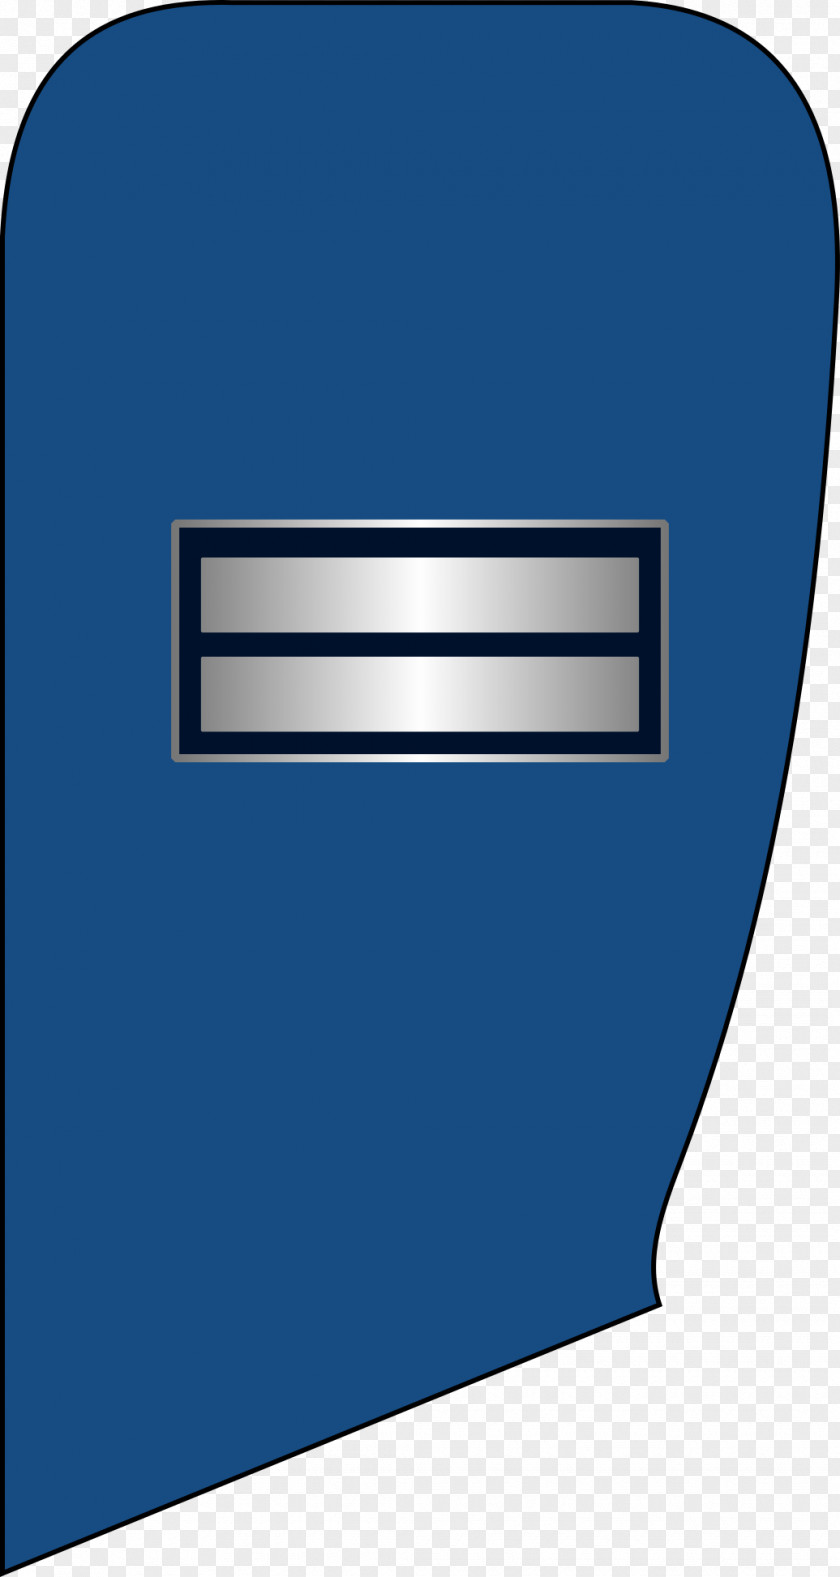 Soldier Sergeant Major 兵長 Warrant Officer Republic Of Korea Air Force PNG